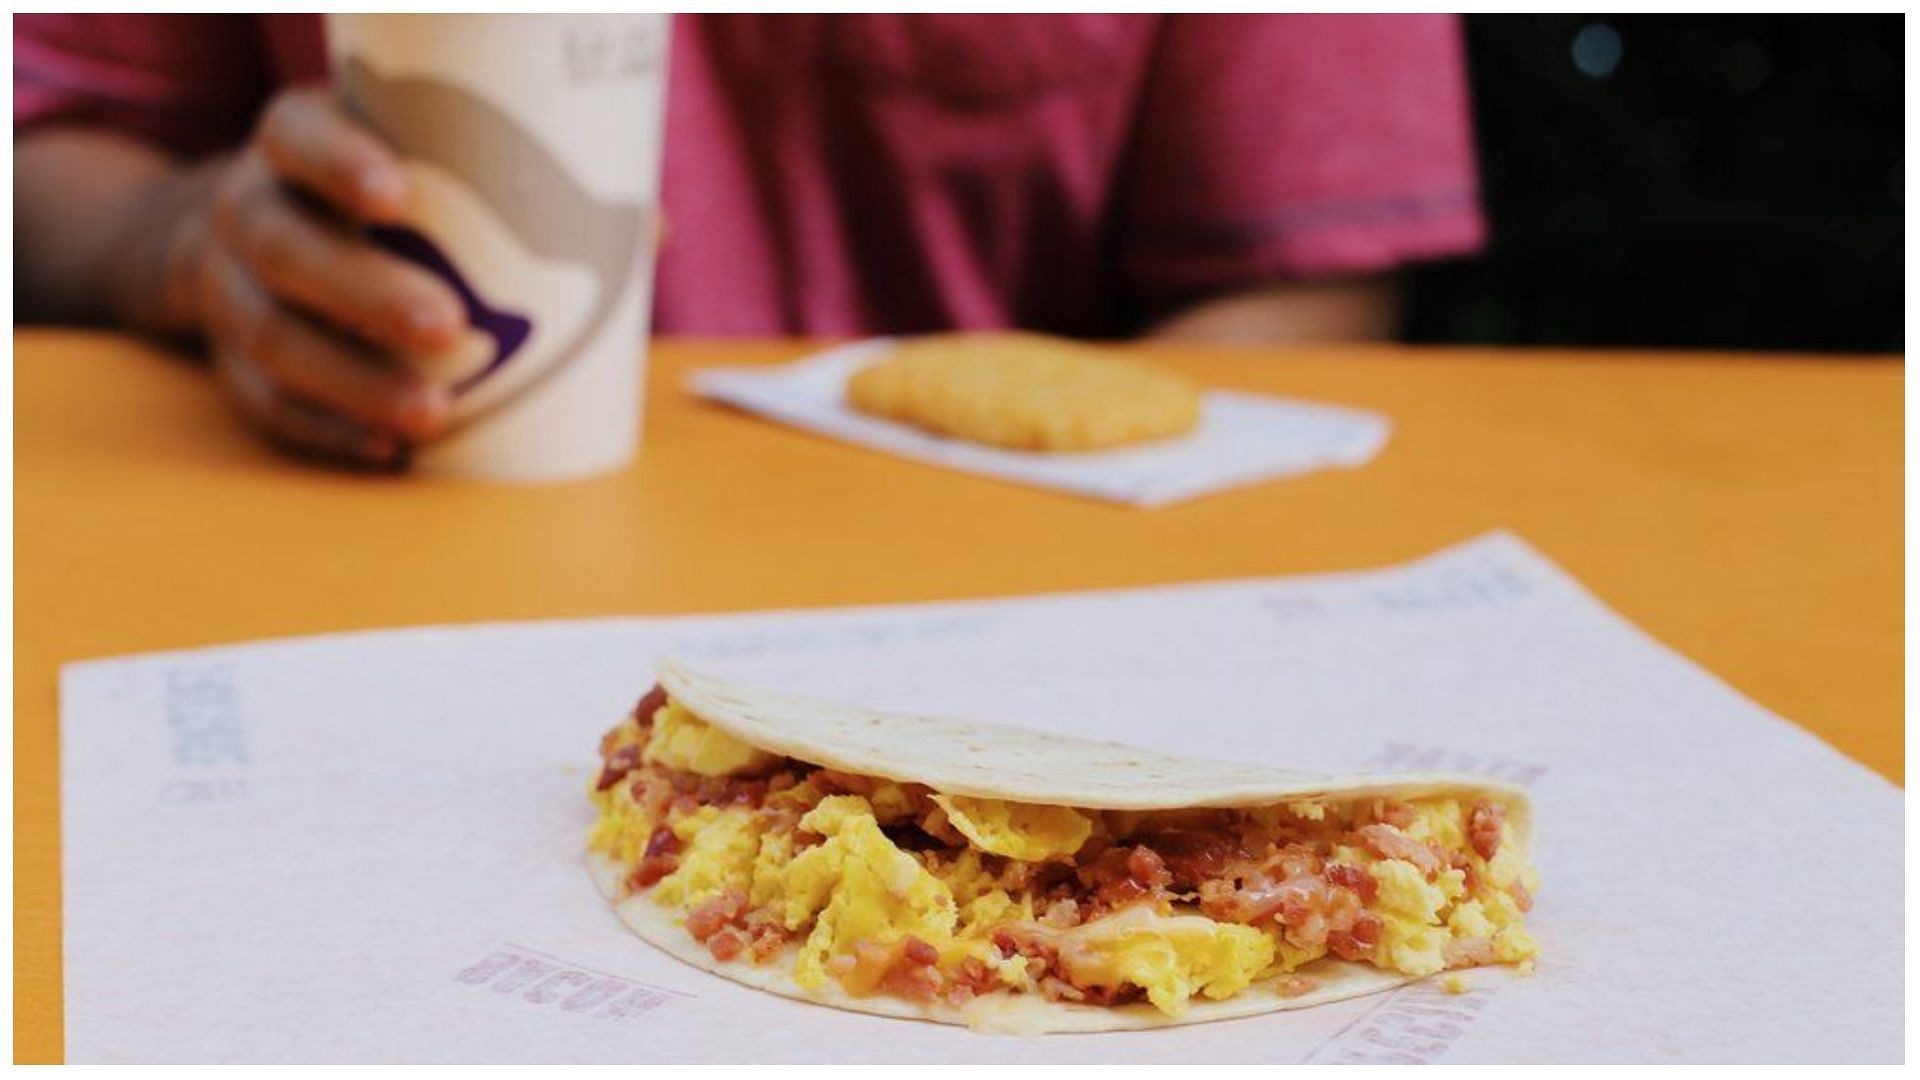 breakfast soft taco with bacon (Promotional Image via Taco Bell)